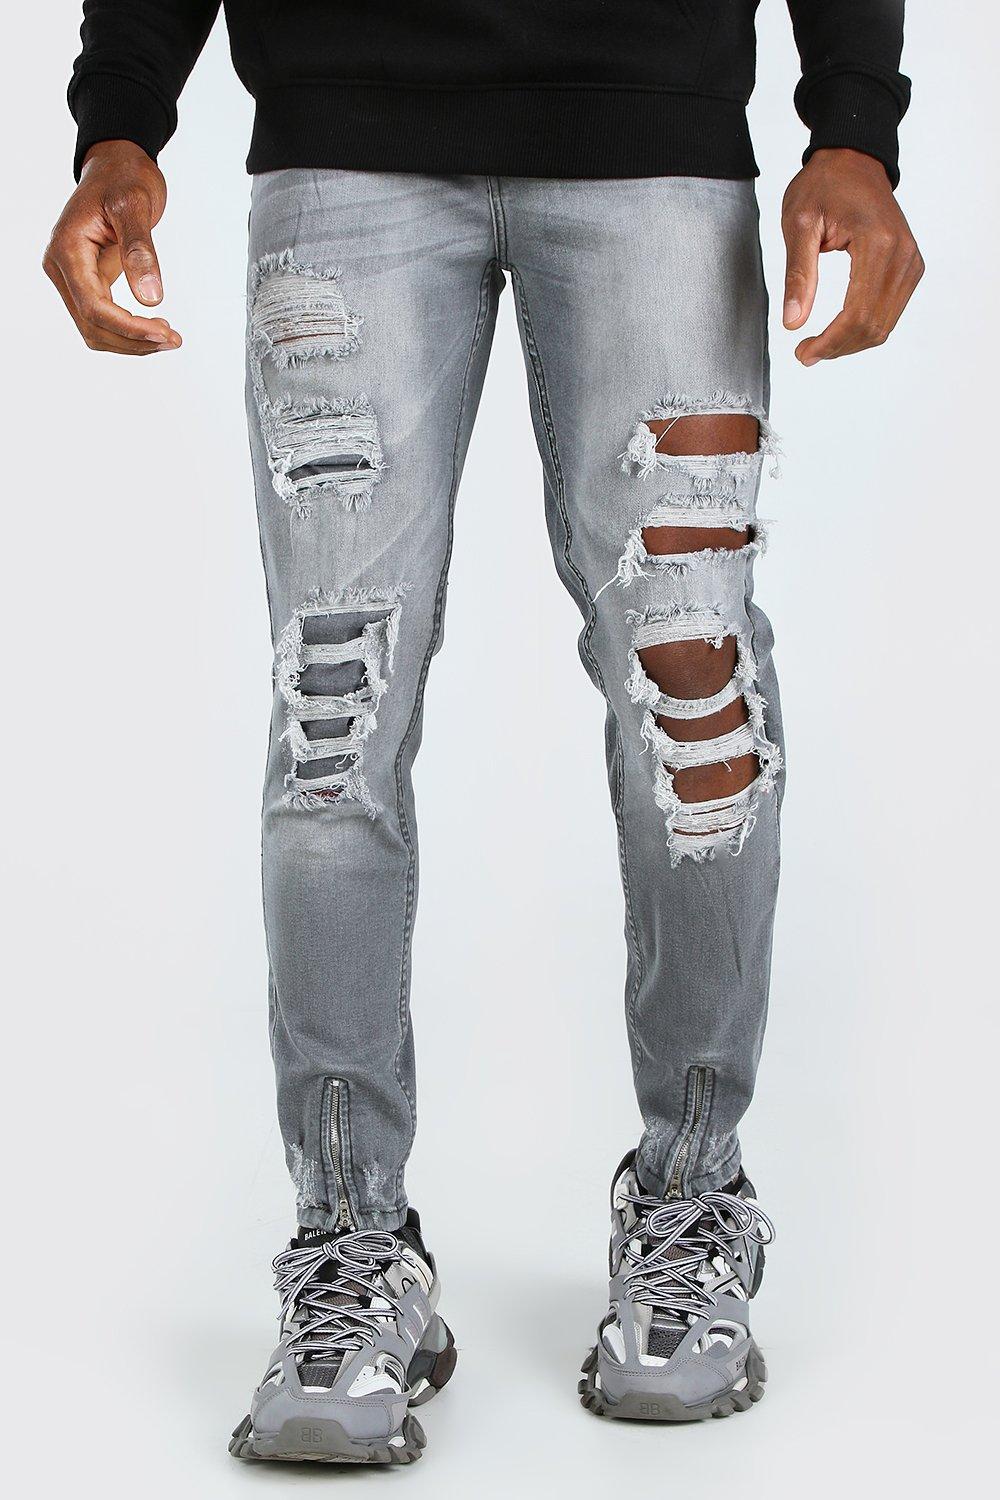 over distressed jeans